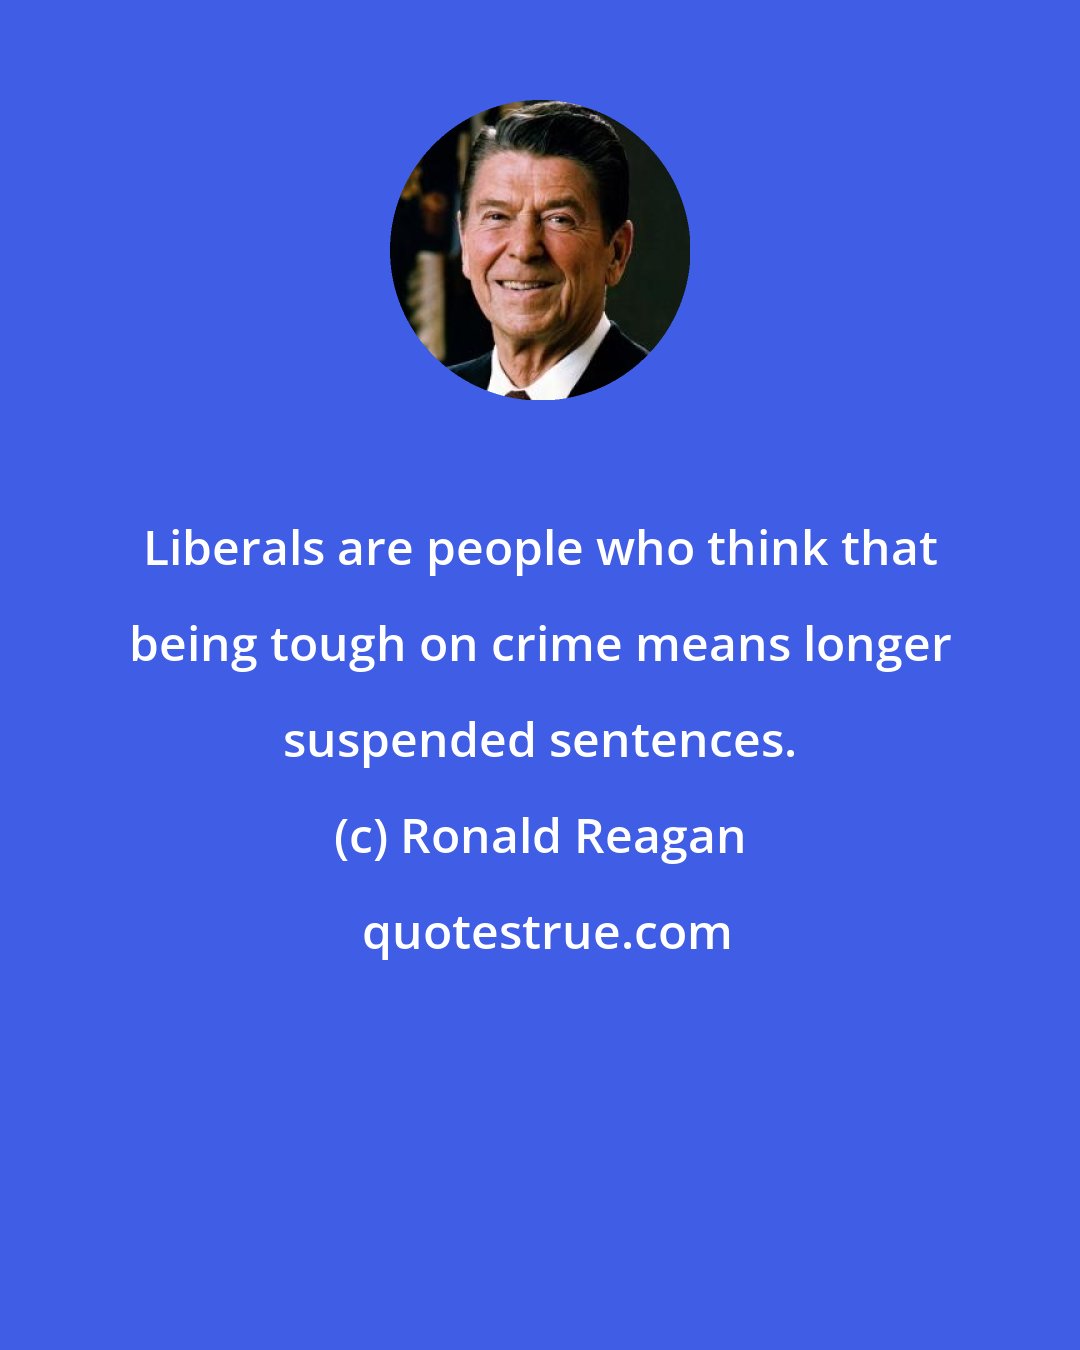 Ronald Reagan: Liberals are people who think that being tough on crime means longer suspended sentences.